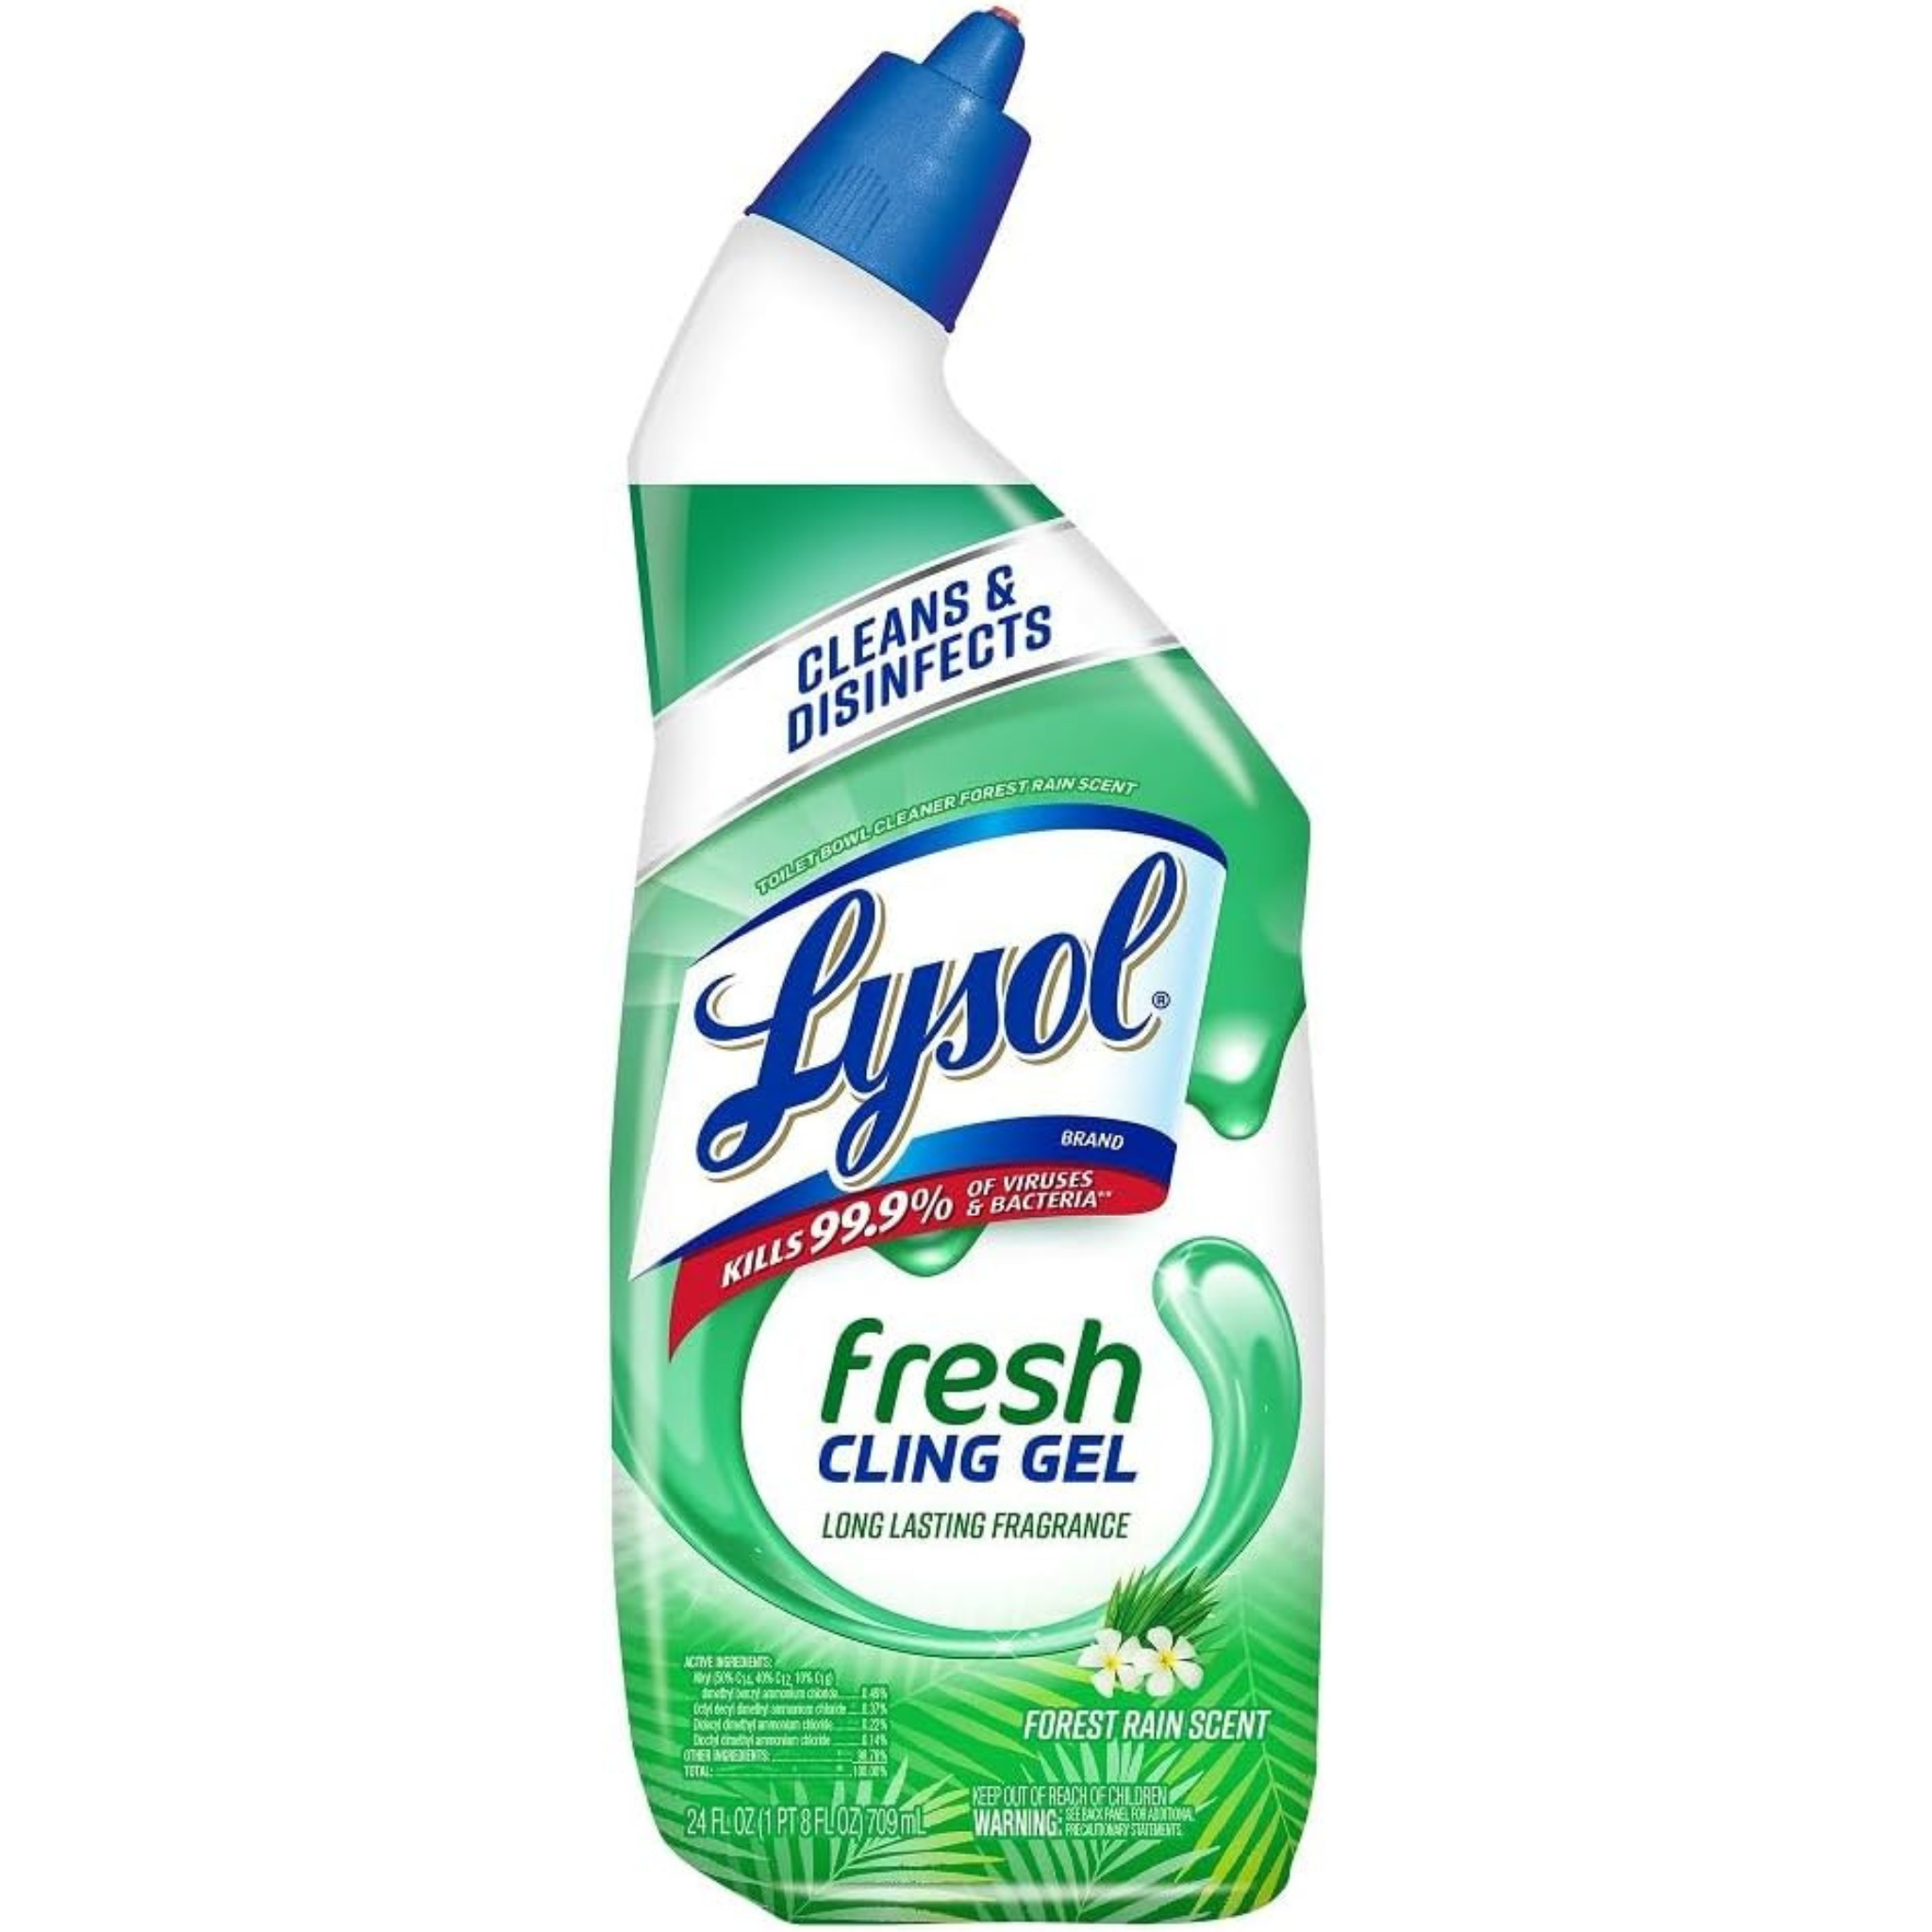 Lysol Toilet Bowl Cleaner Gel For Cleaning and Disinfecting